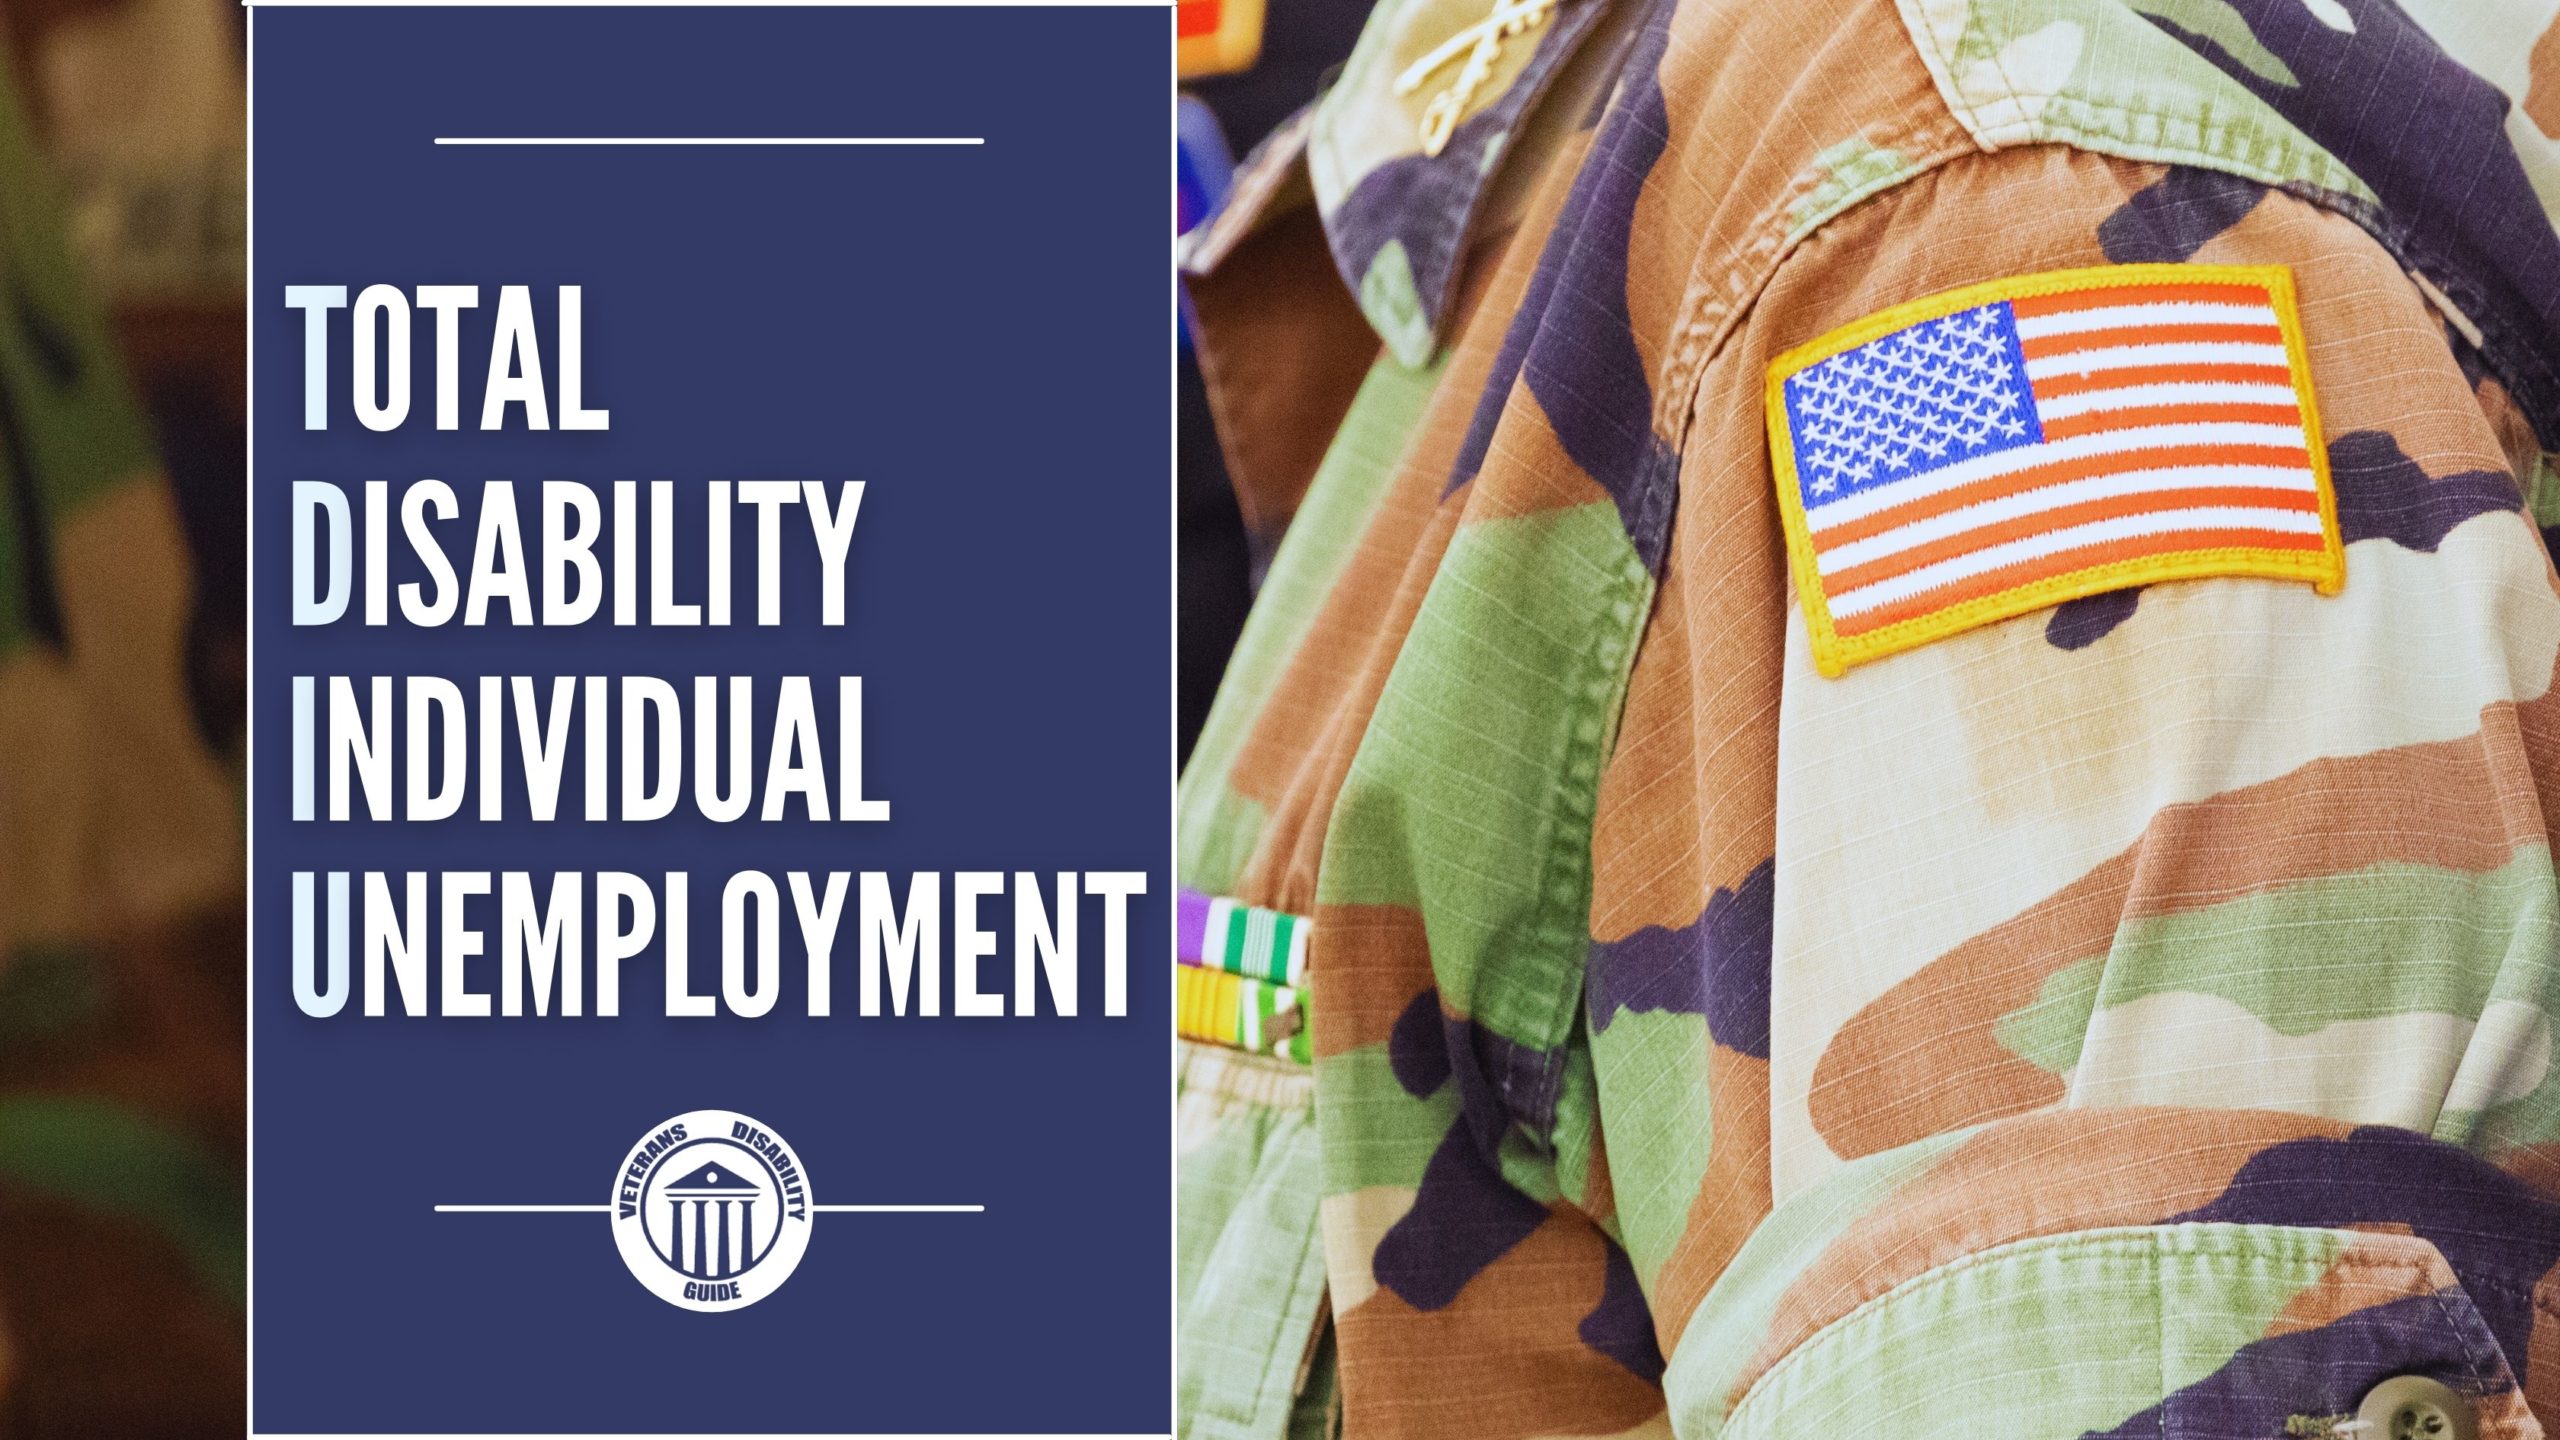 Total Disability Individual Unemployment blog header image